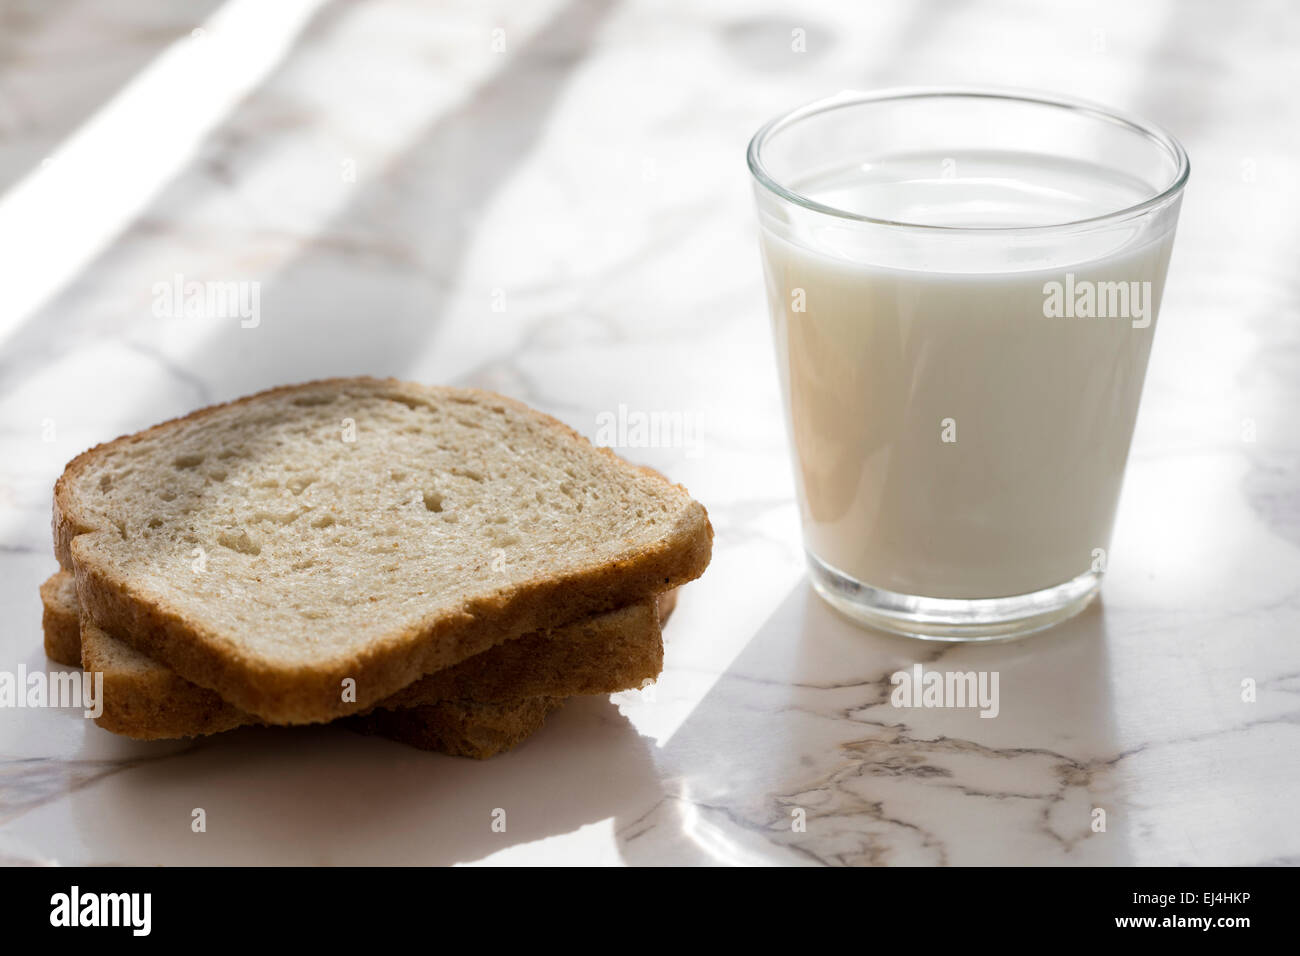 One glass of milk and dark bread on the table Stock Photo